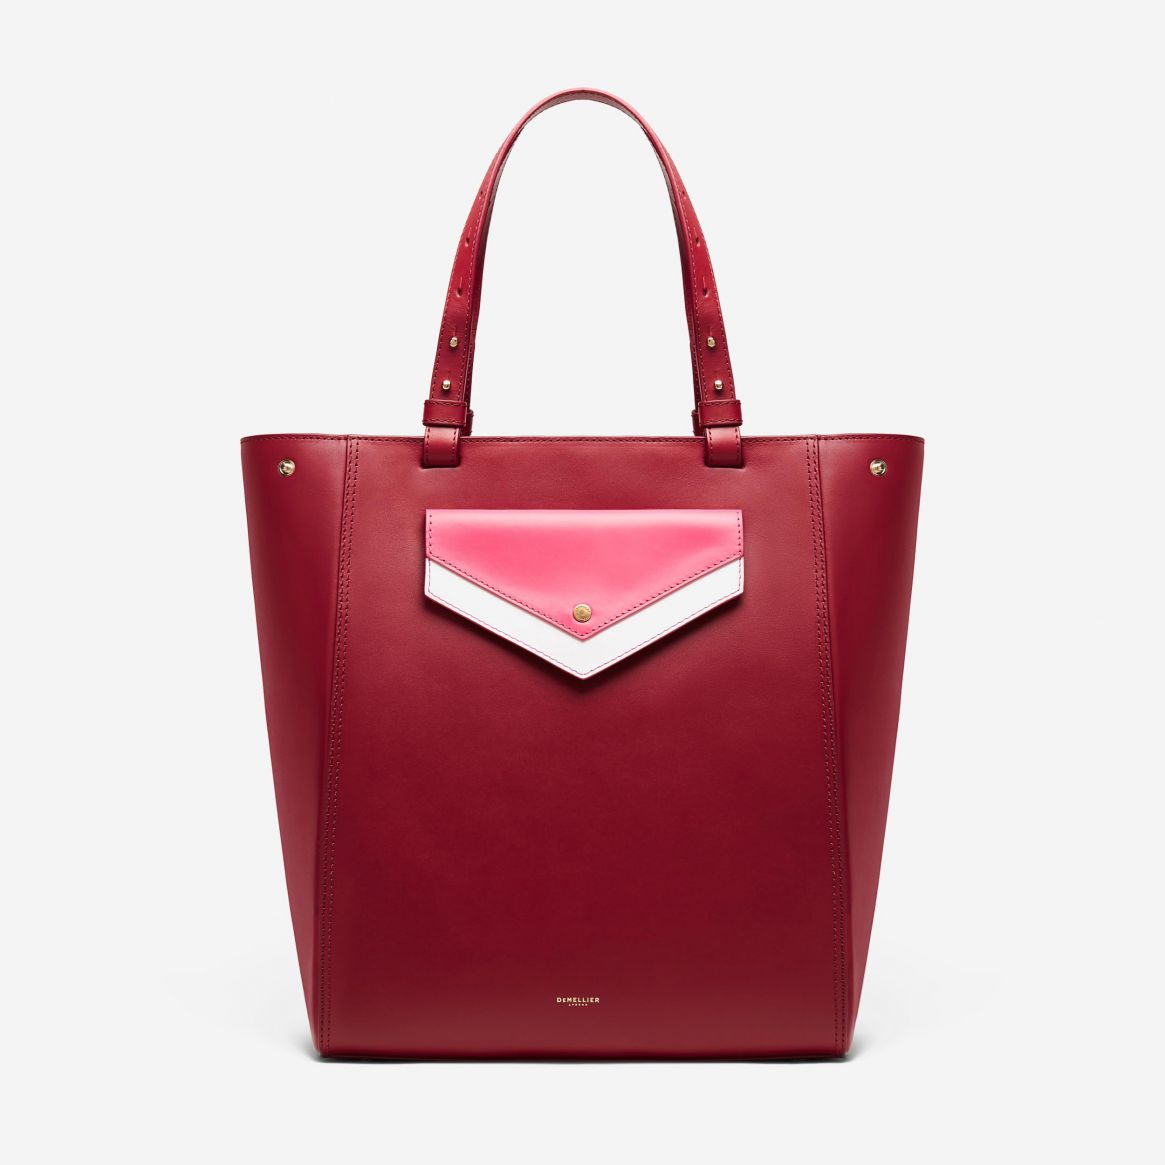 Demellier San Diego tote bag in berry magenta white